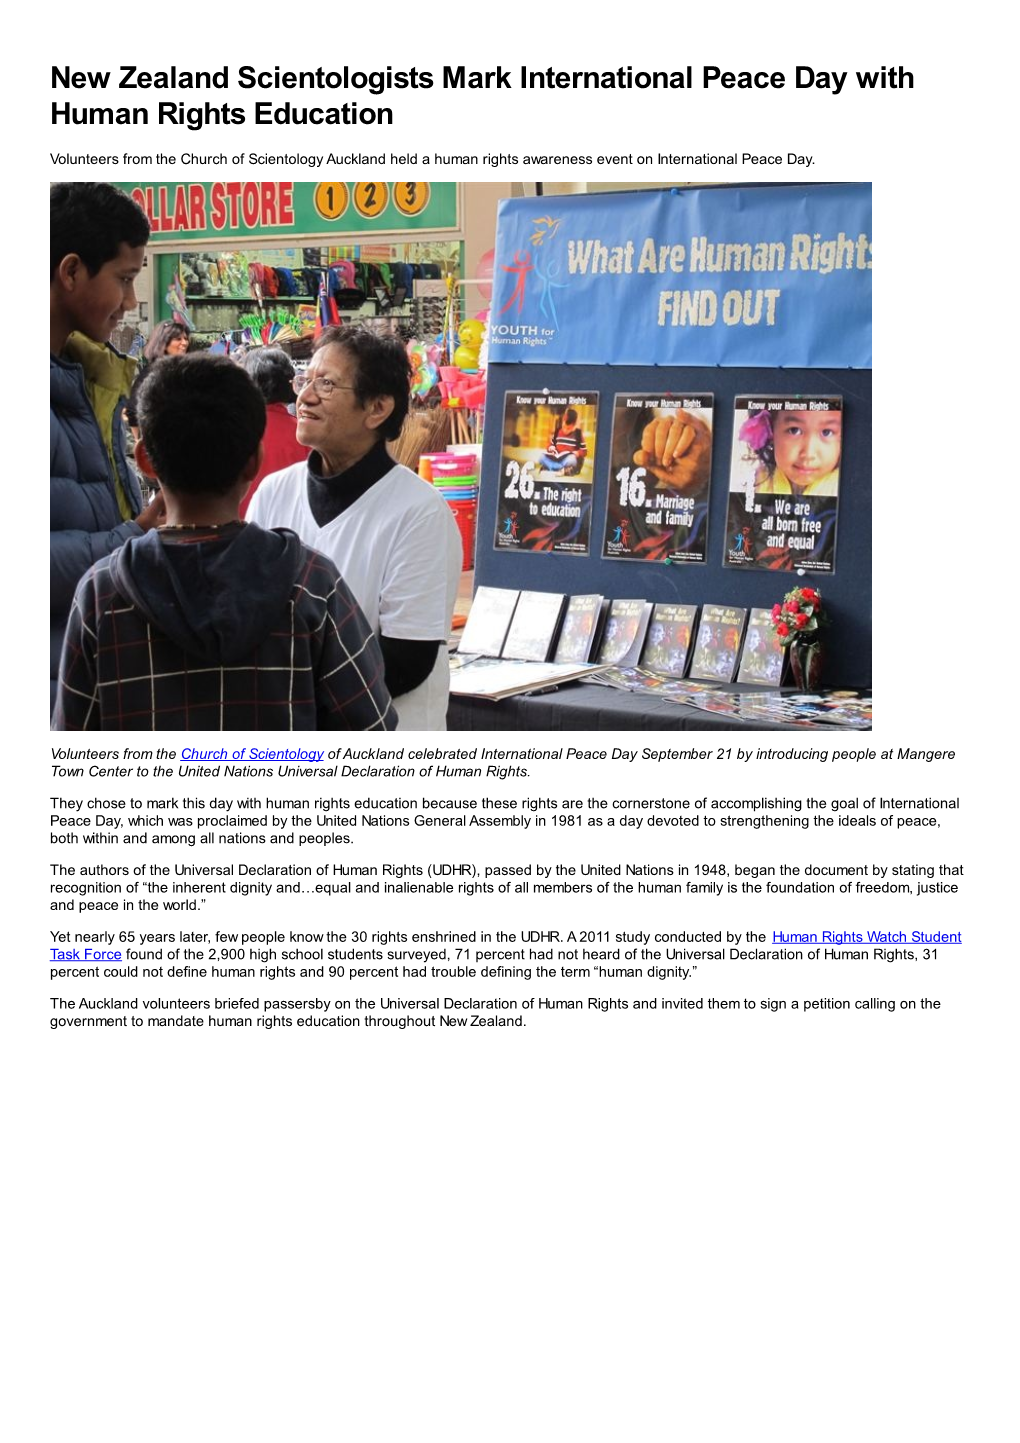 New Zealand Scientologists Mark International Peace Day with Human Rights Education